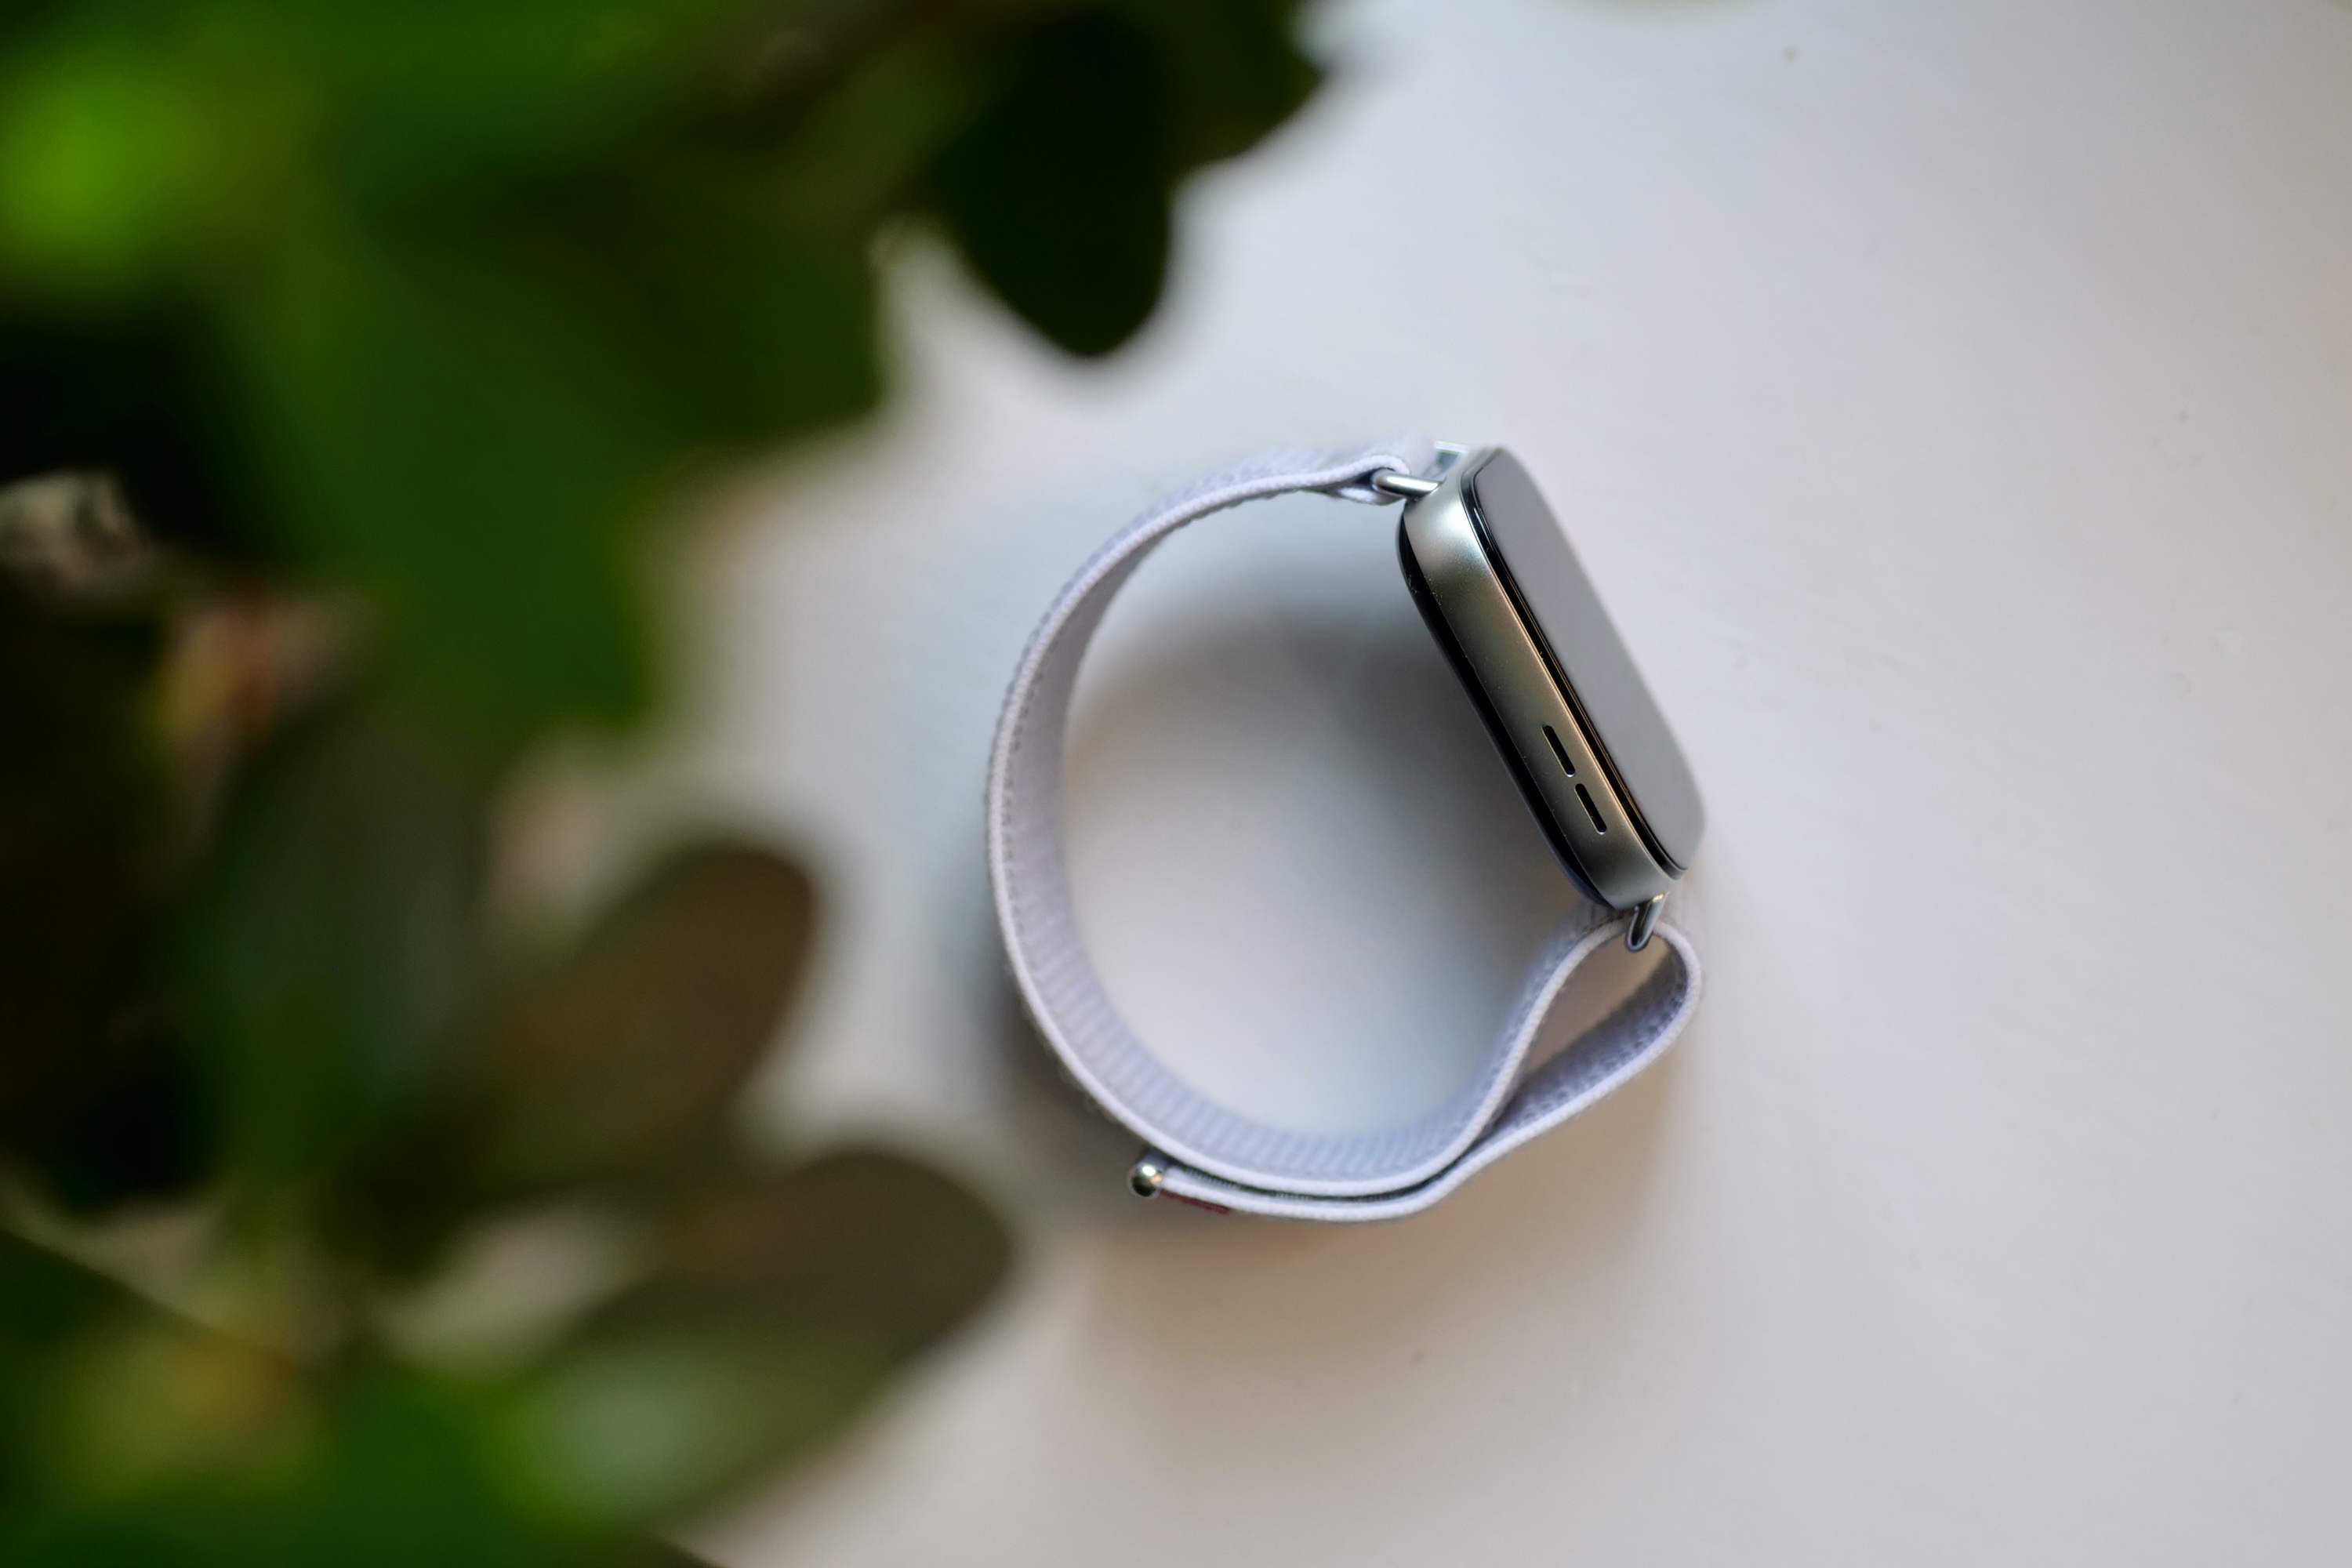 The side of the Huawei Watch Fit 3, showing the speaker.